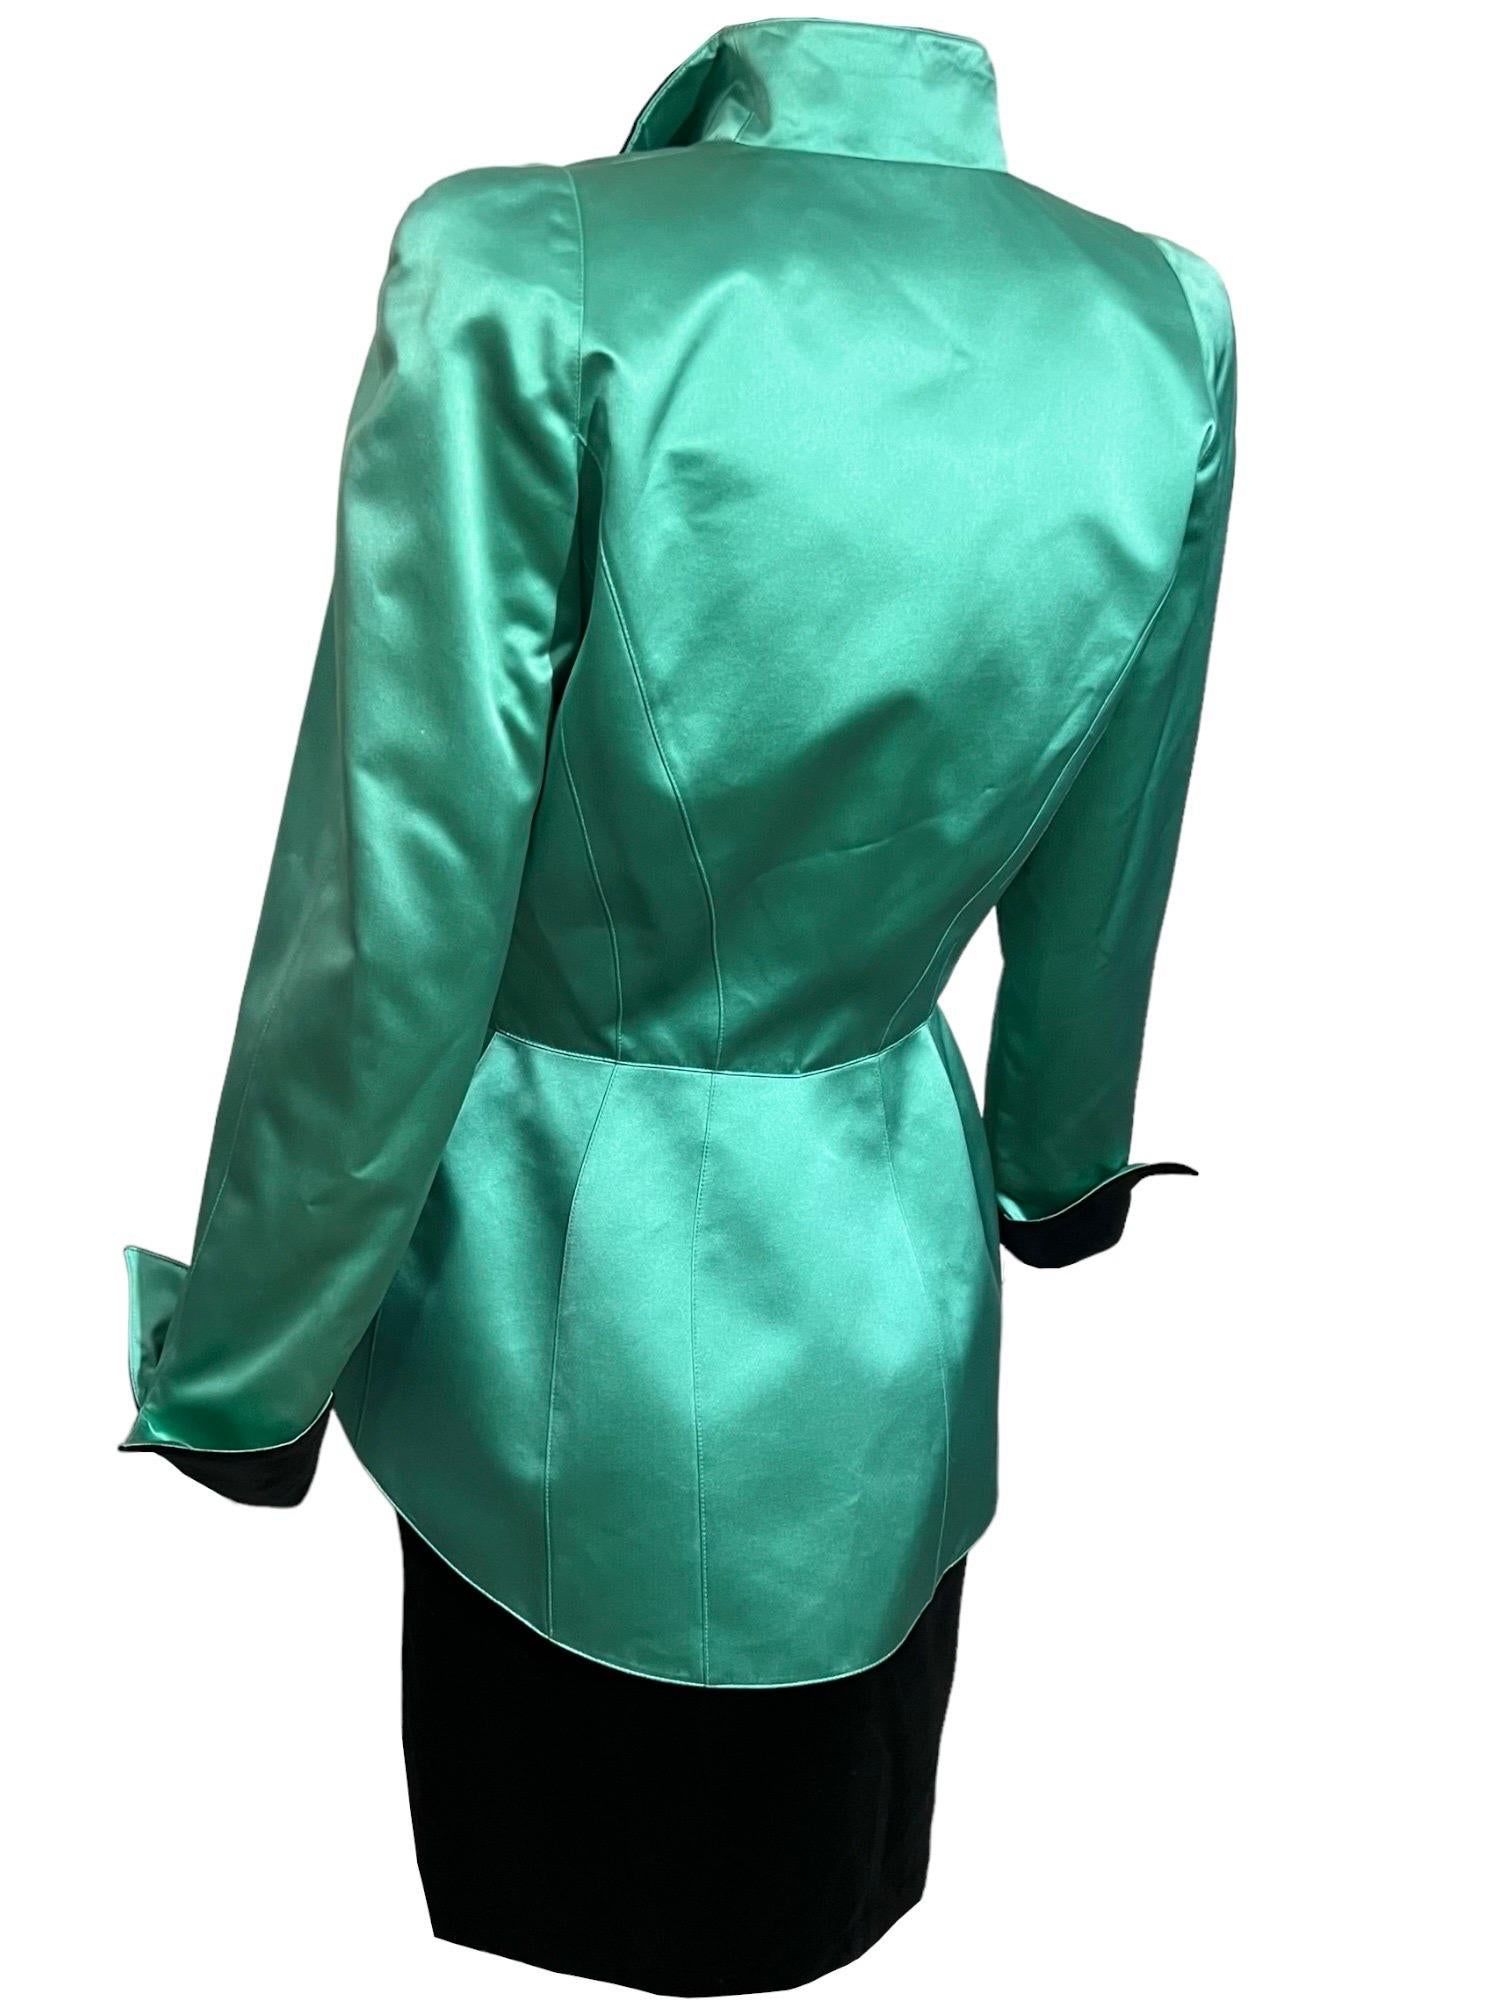 F/W 1996 Thierry Mugler Green Silk Structural Runway Suit With Tags For Sale 7